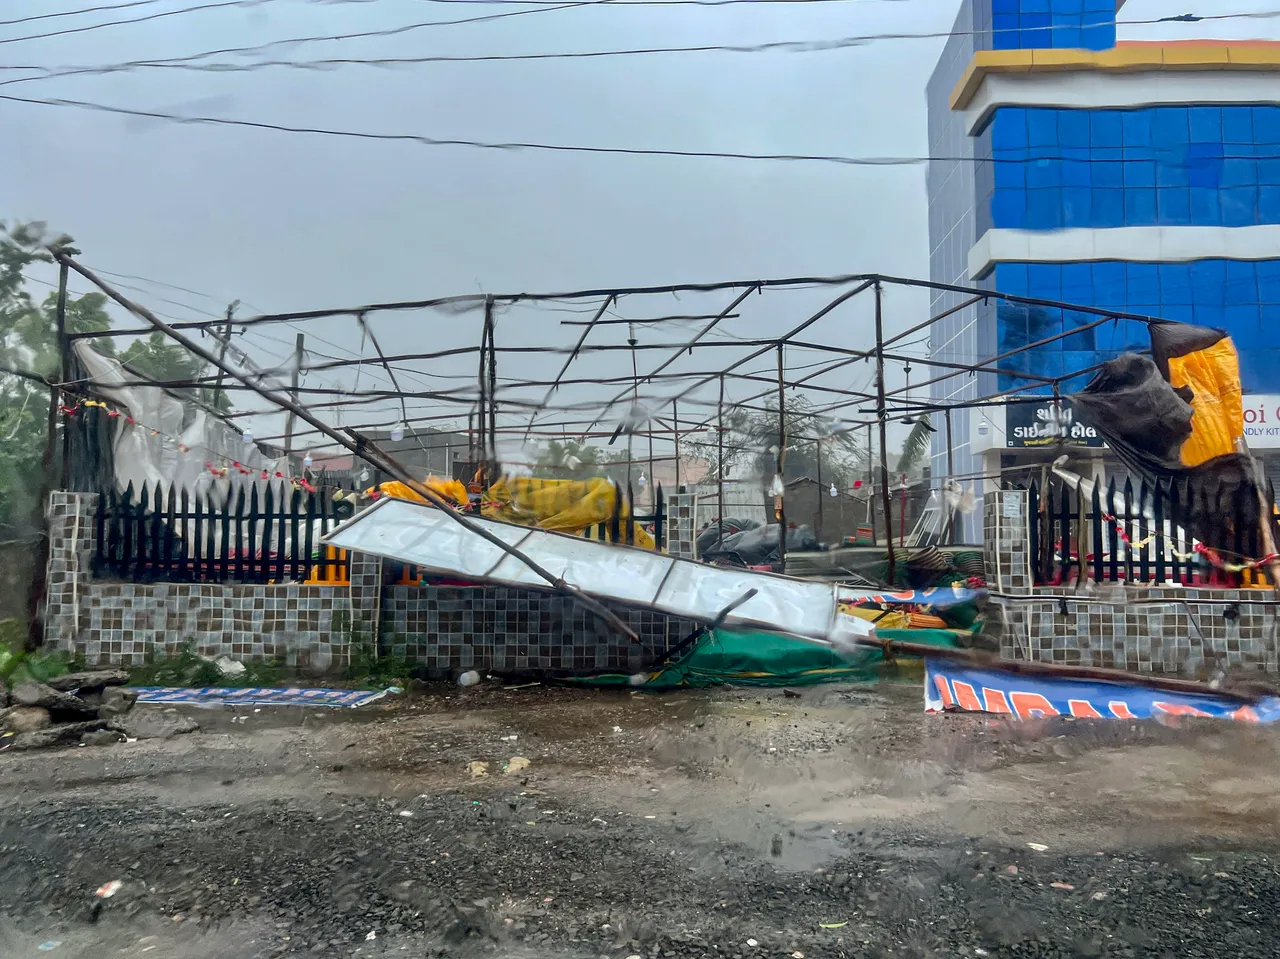 Damaged restaurant at Mandvi following the landfall of Cyclone Biparjoy, in Kutch district